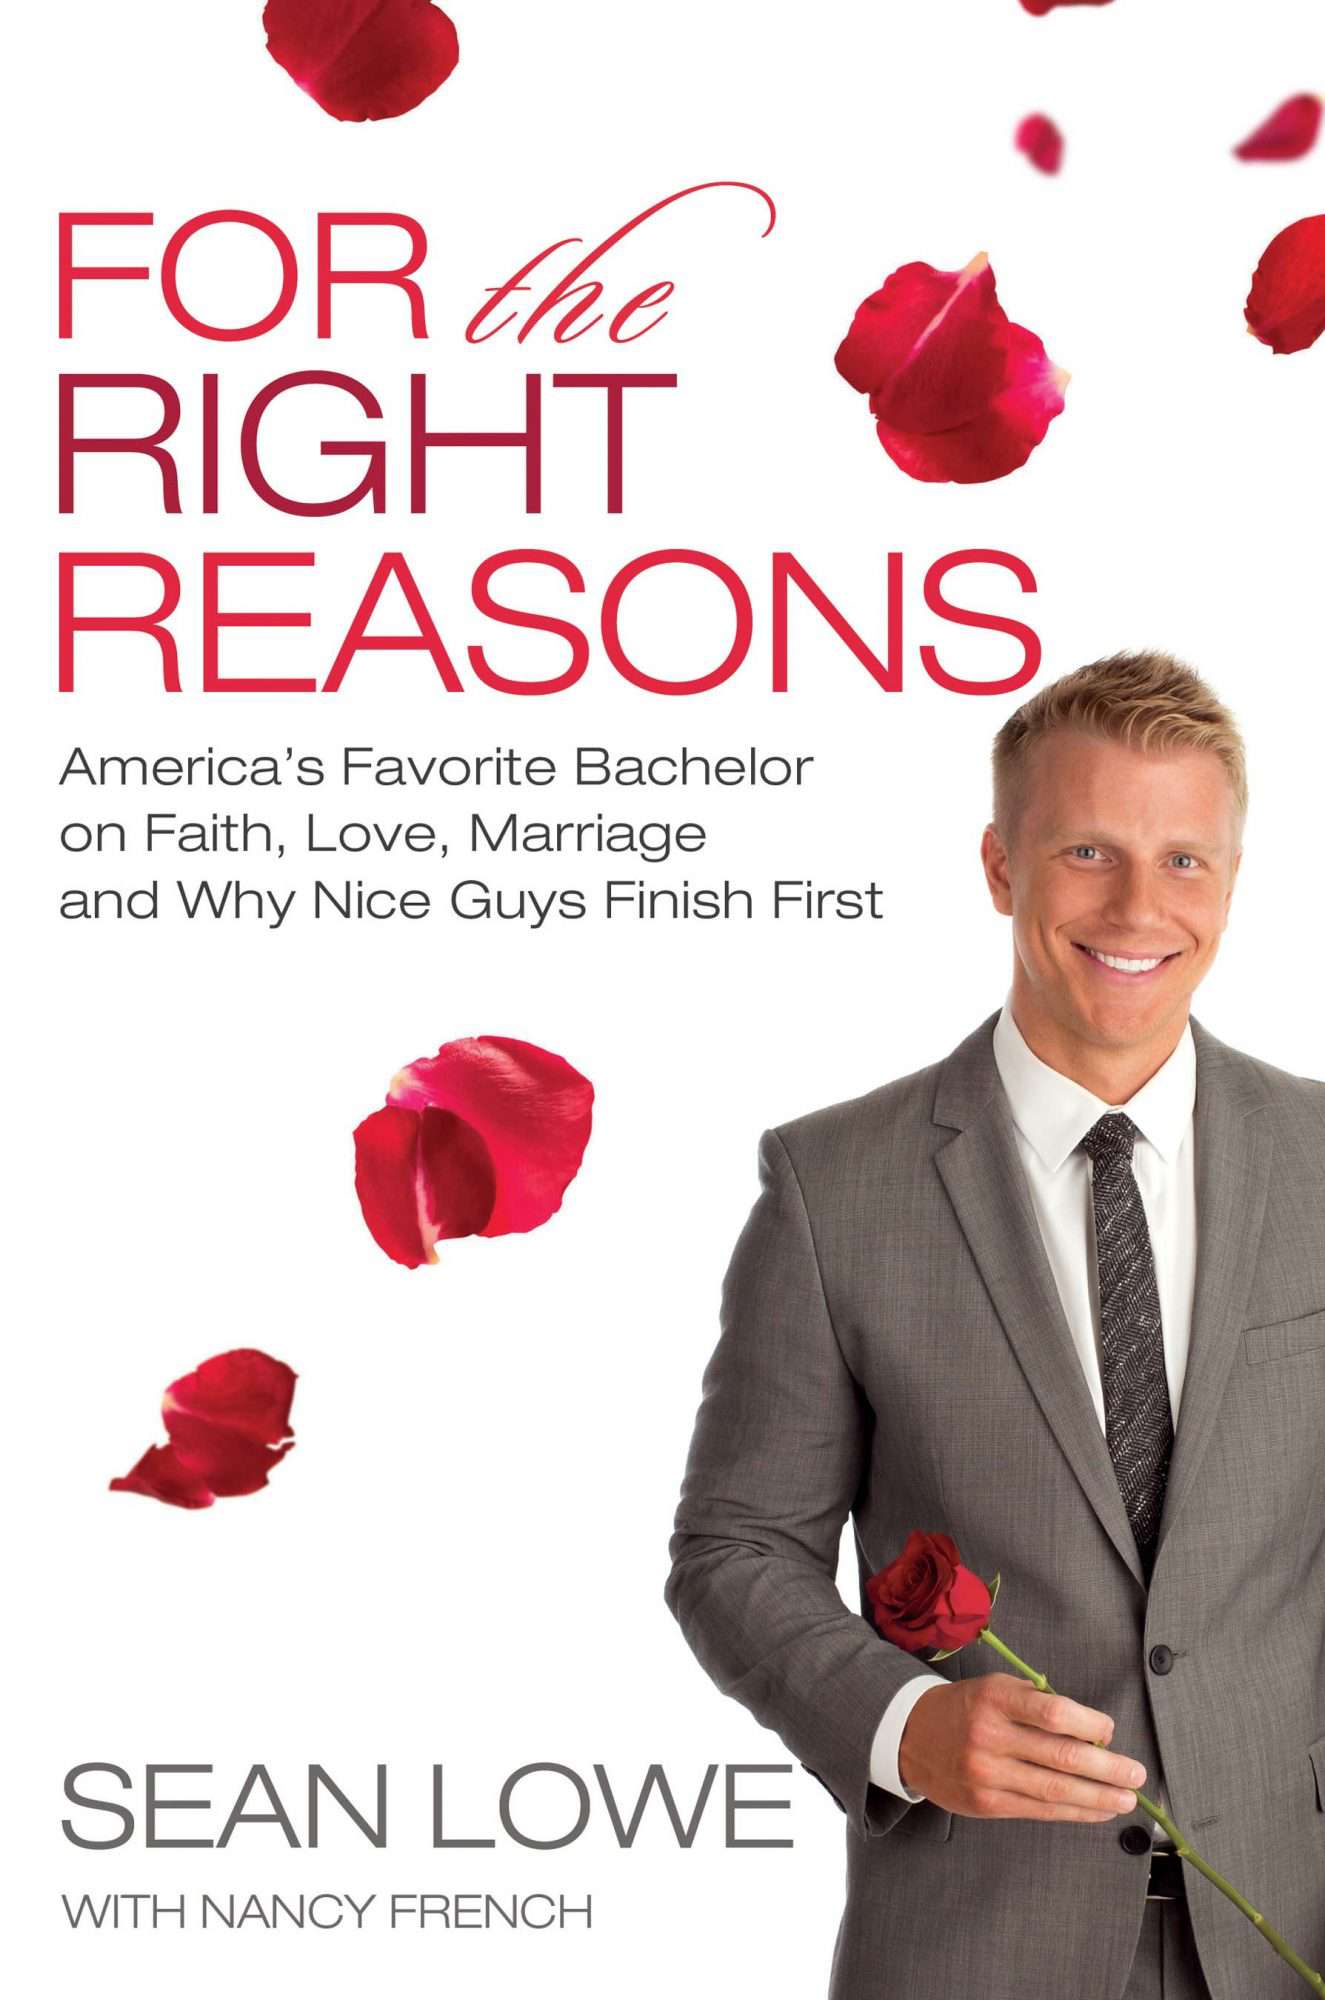 For the Right Reasons: America's Favorite Bachelor on Faith, Love, Marriage and Why Nice Guys Finish First by Sean Lowe